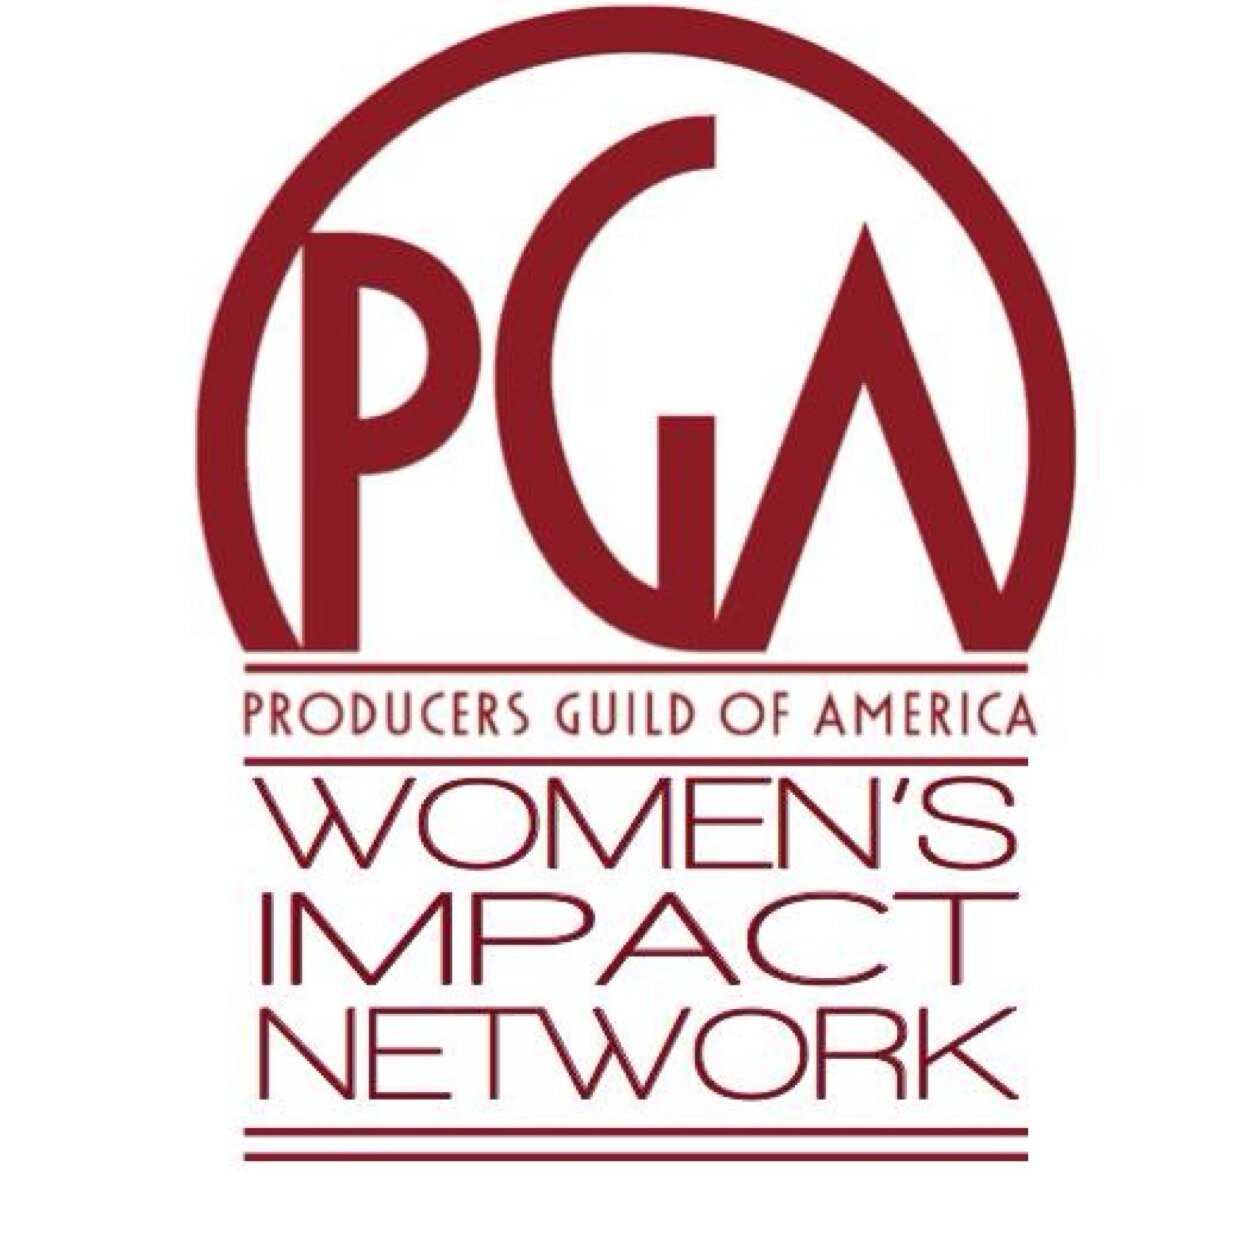 To promote gender equity as part of the Producers' Guild of America's larger vision of diversity.